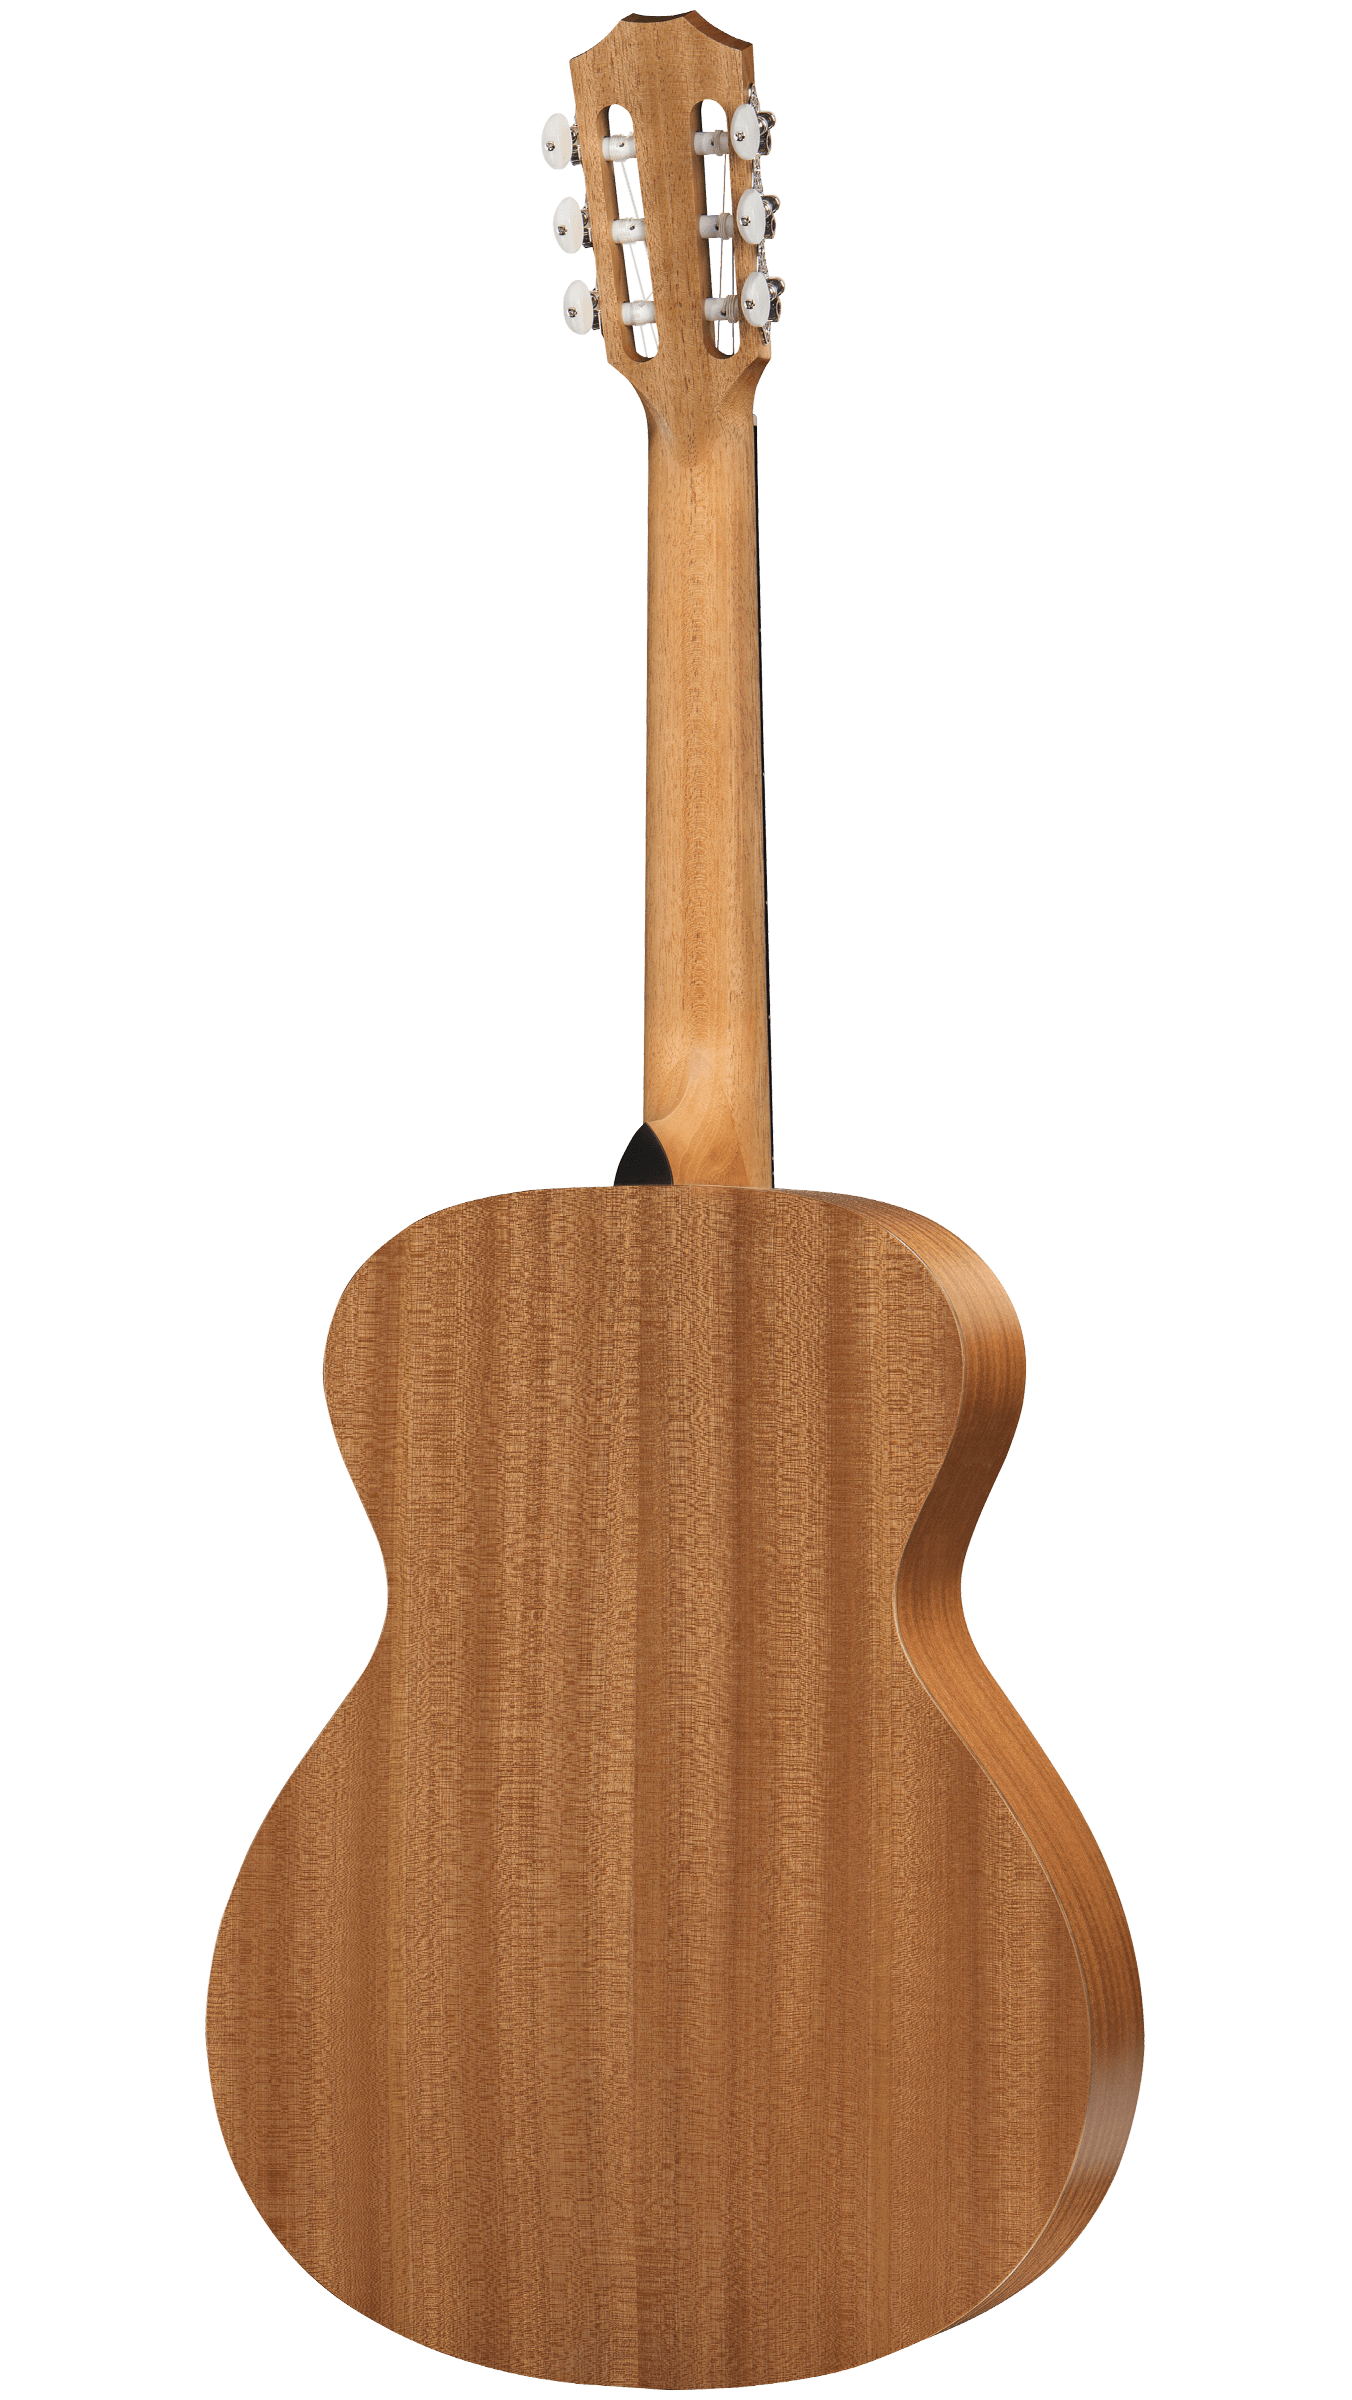 TAYLOR ACADEMY 12-N - LAYERED SAPELE BACK AND SIDES WITH BAG (ACADEMY 12N / ACADEMY 12 N), TAYLOR, CLASSICAL GUITAR, taylor-classical-guitar-academy12-n, ZOSO MUSIC SDN BHD